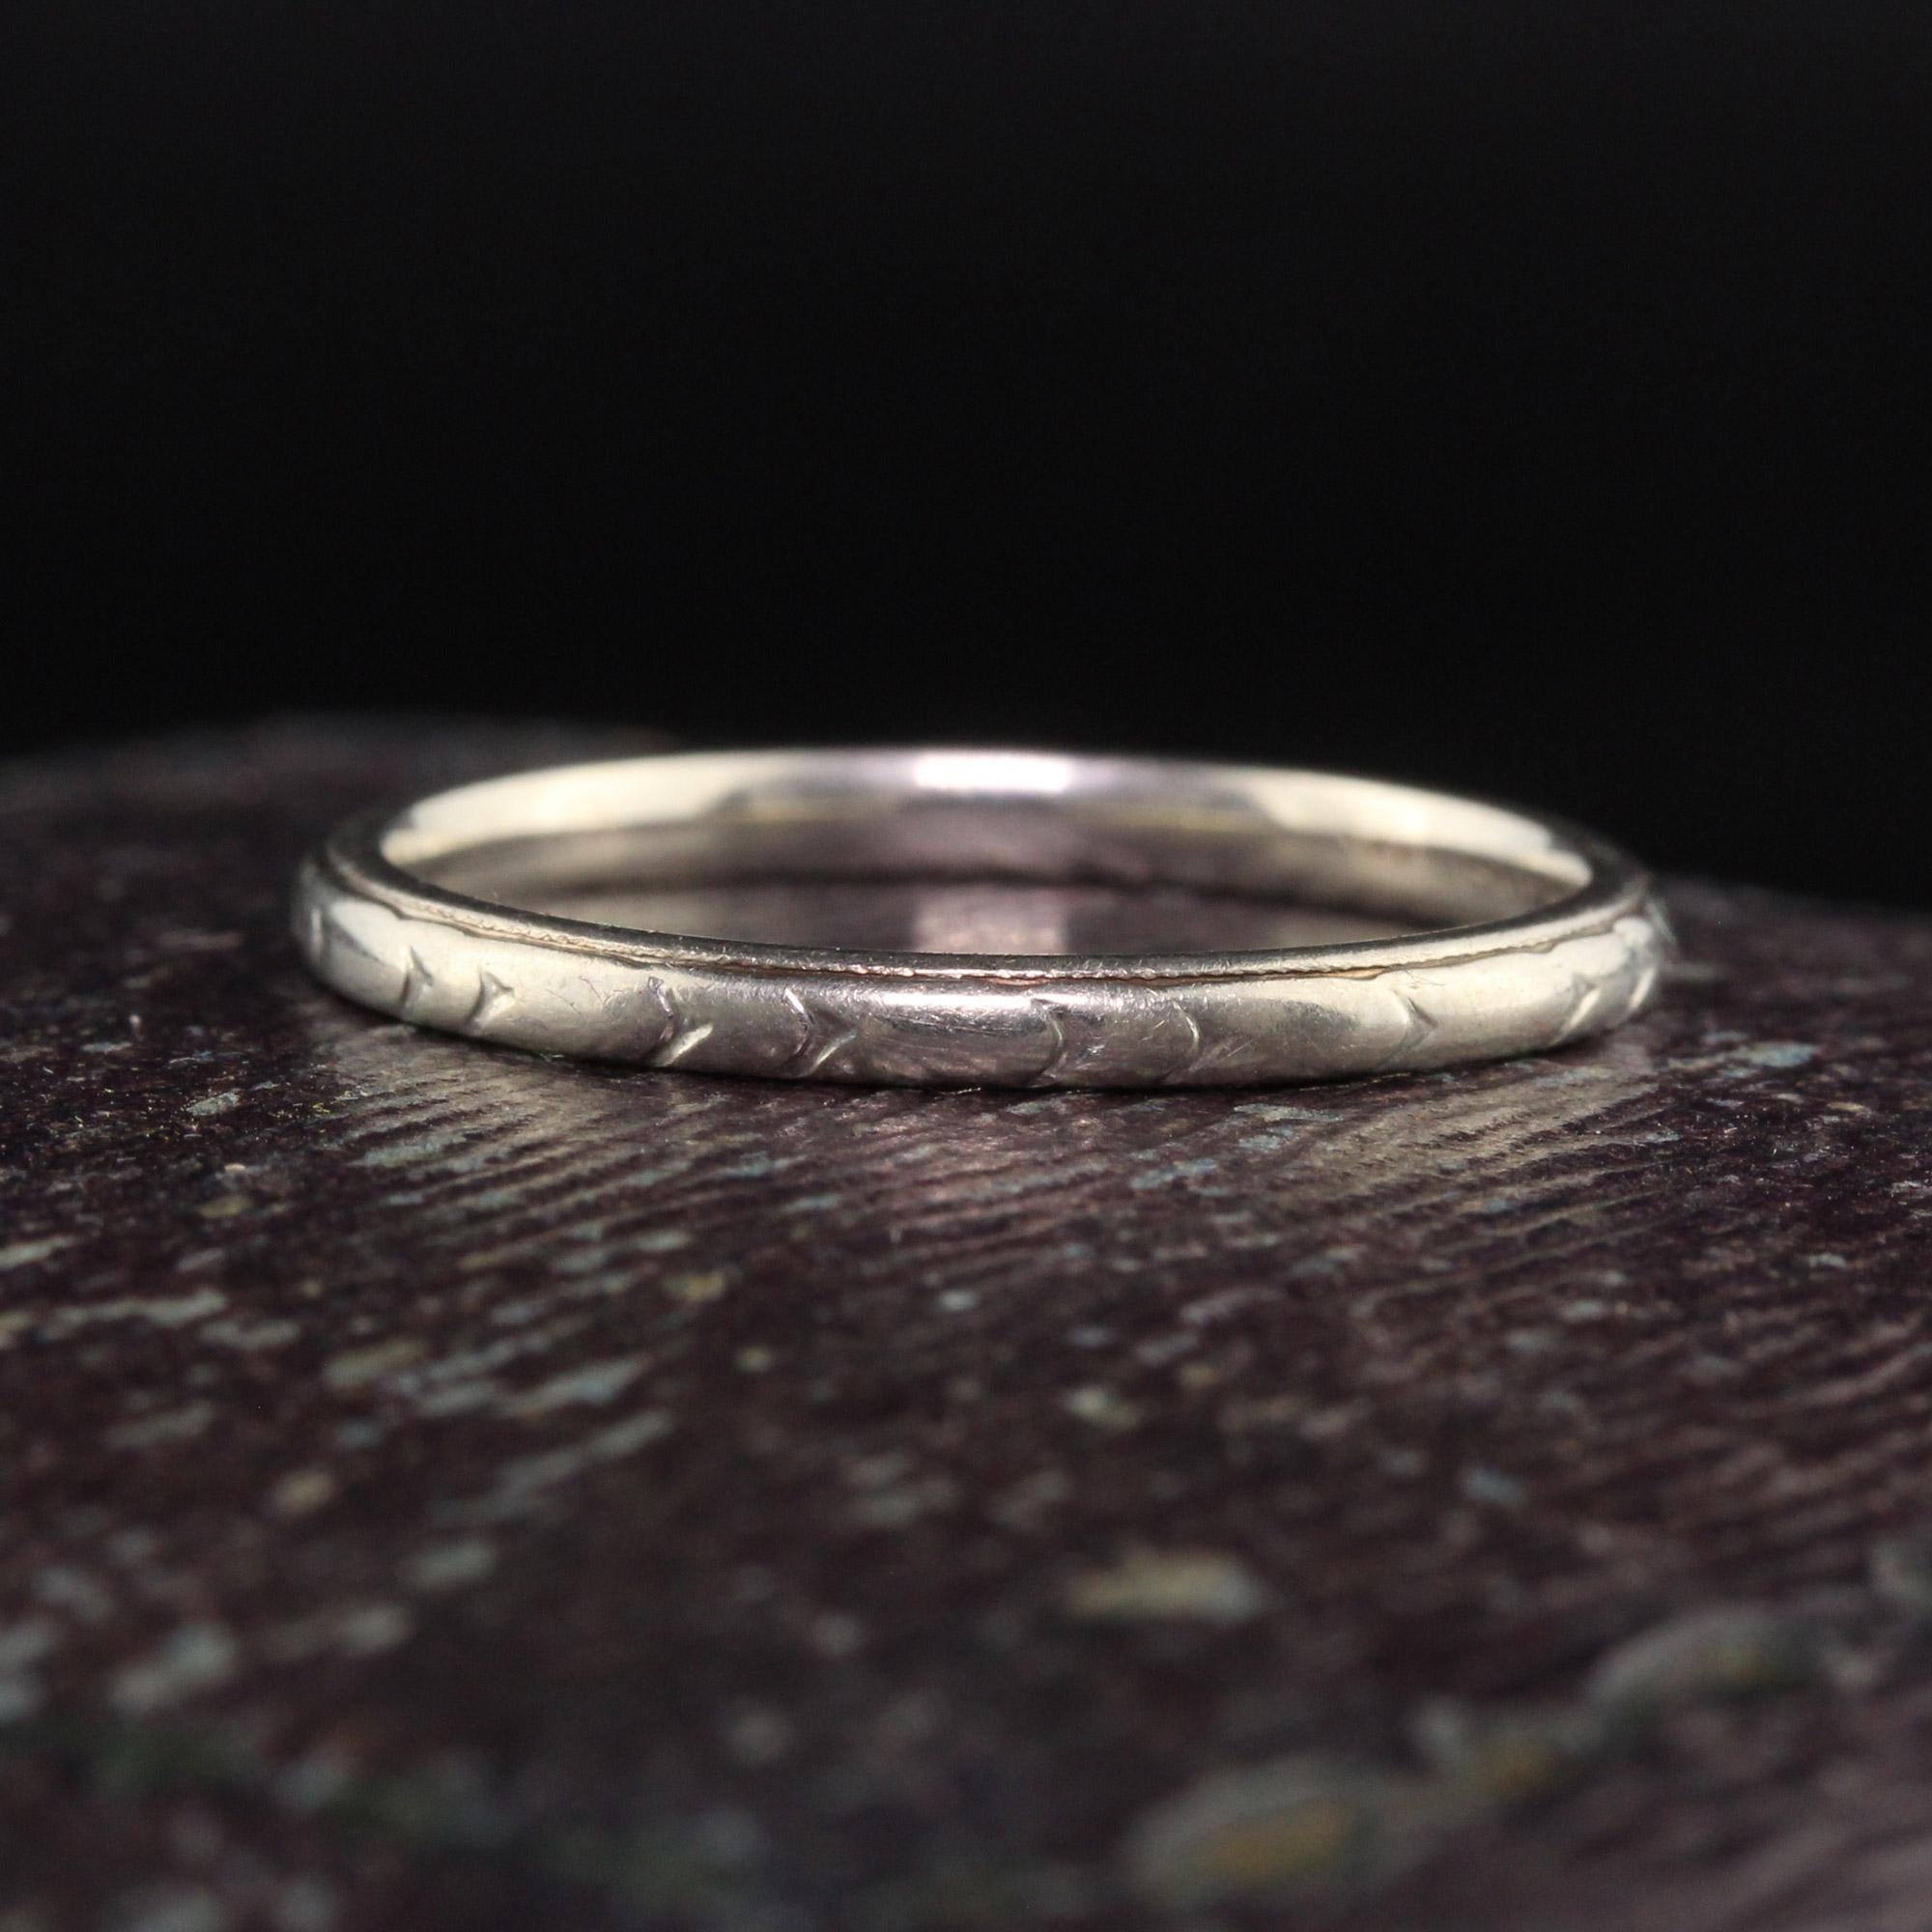 Beautiful Antique Art Deco 18K White Gold Werner Engraved Wedding Band - Size 6. This beautiful wedding band is crafted in 18k white gold. The band has engravings going around the entire ring and the makers mark Werner inside the band.

Item